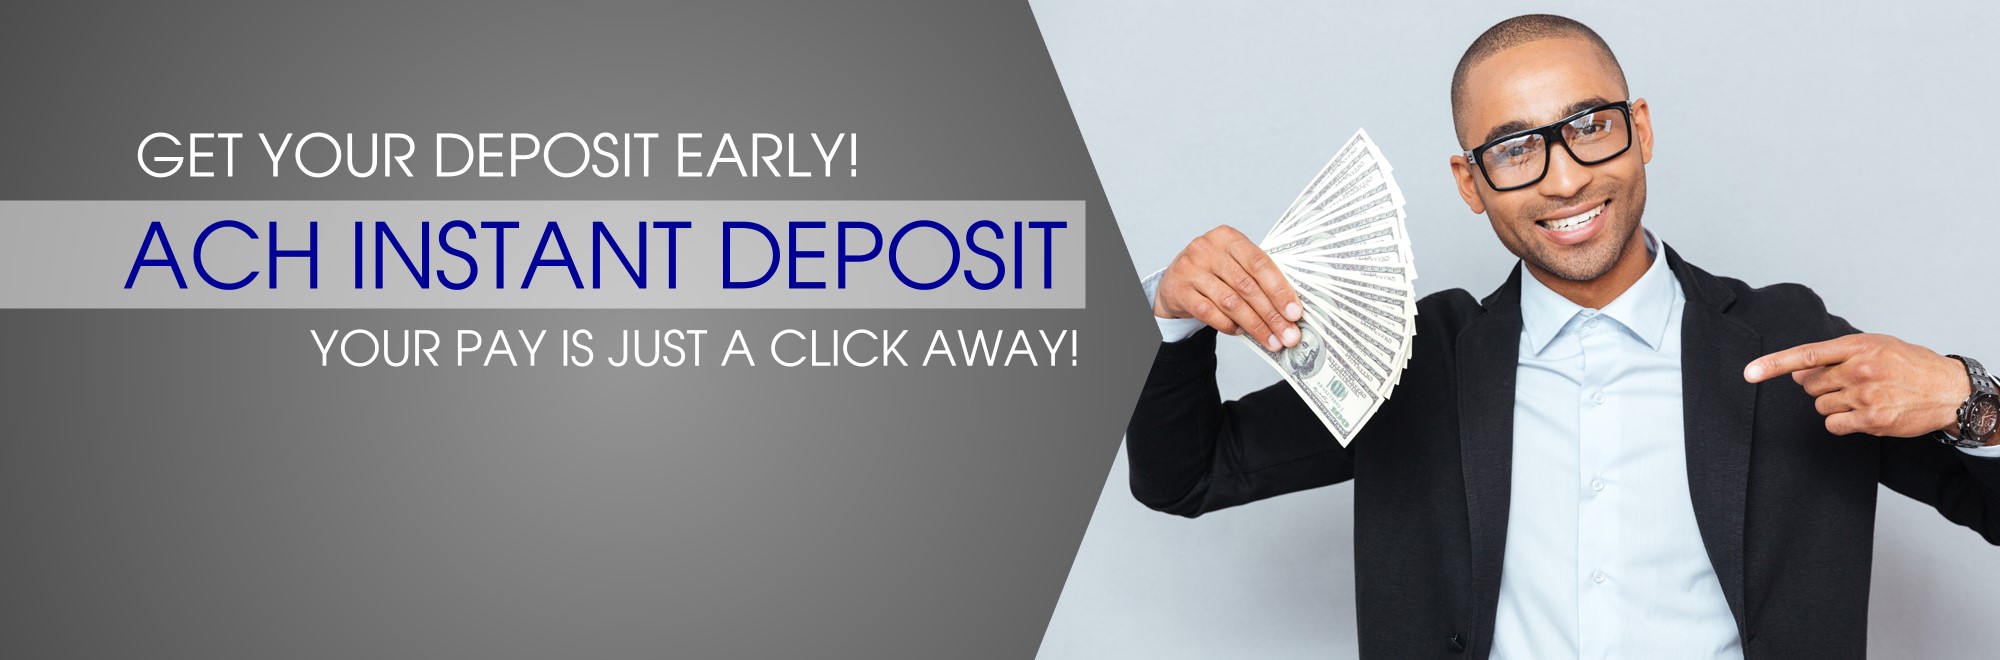 Get your deposit early. ACH Instant Deposit. Your pay is just a click away.